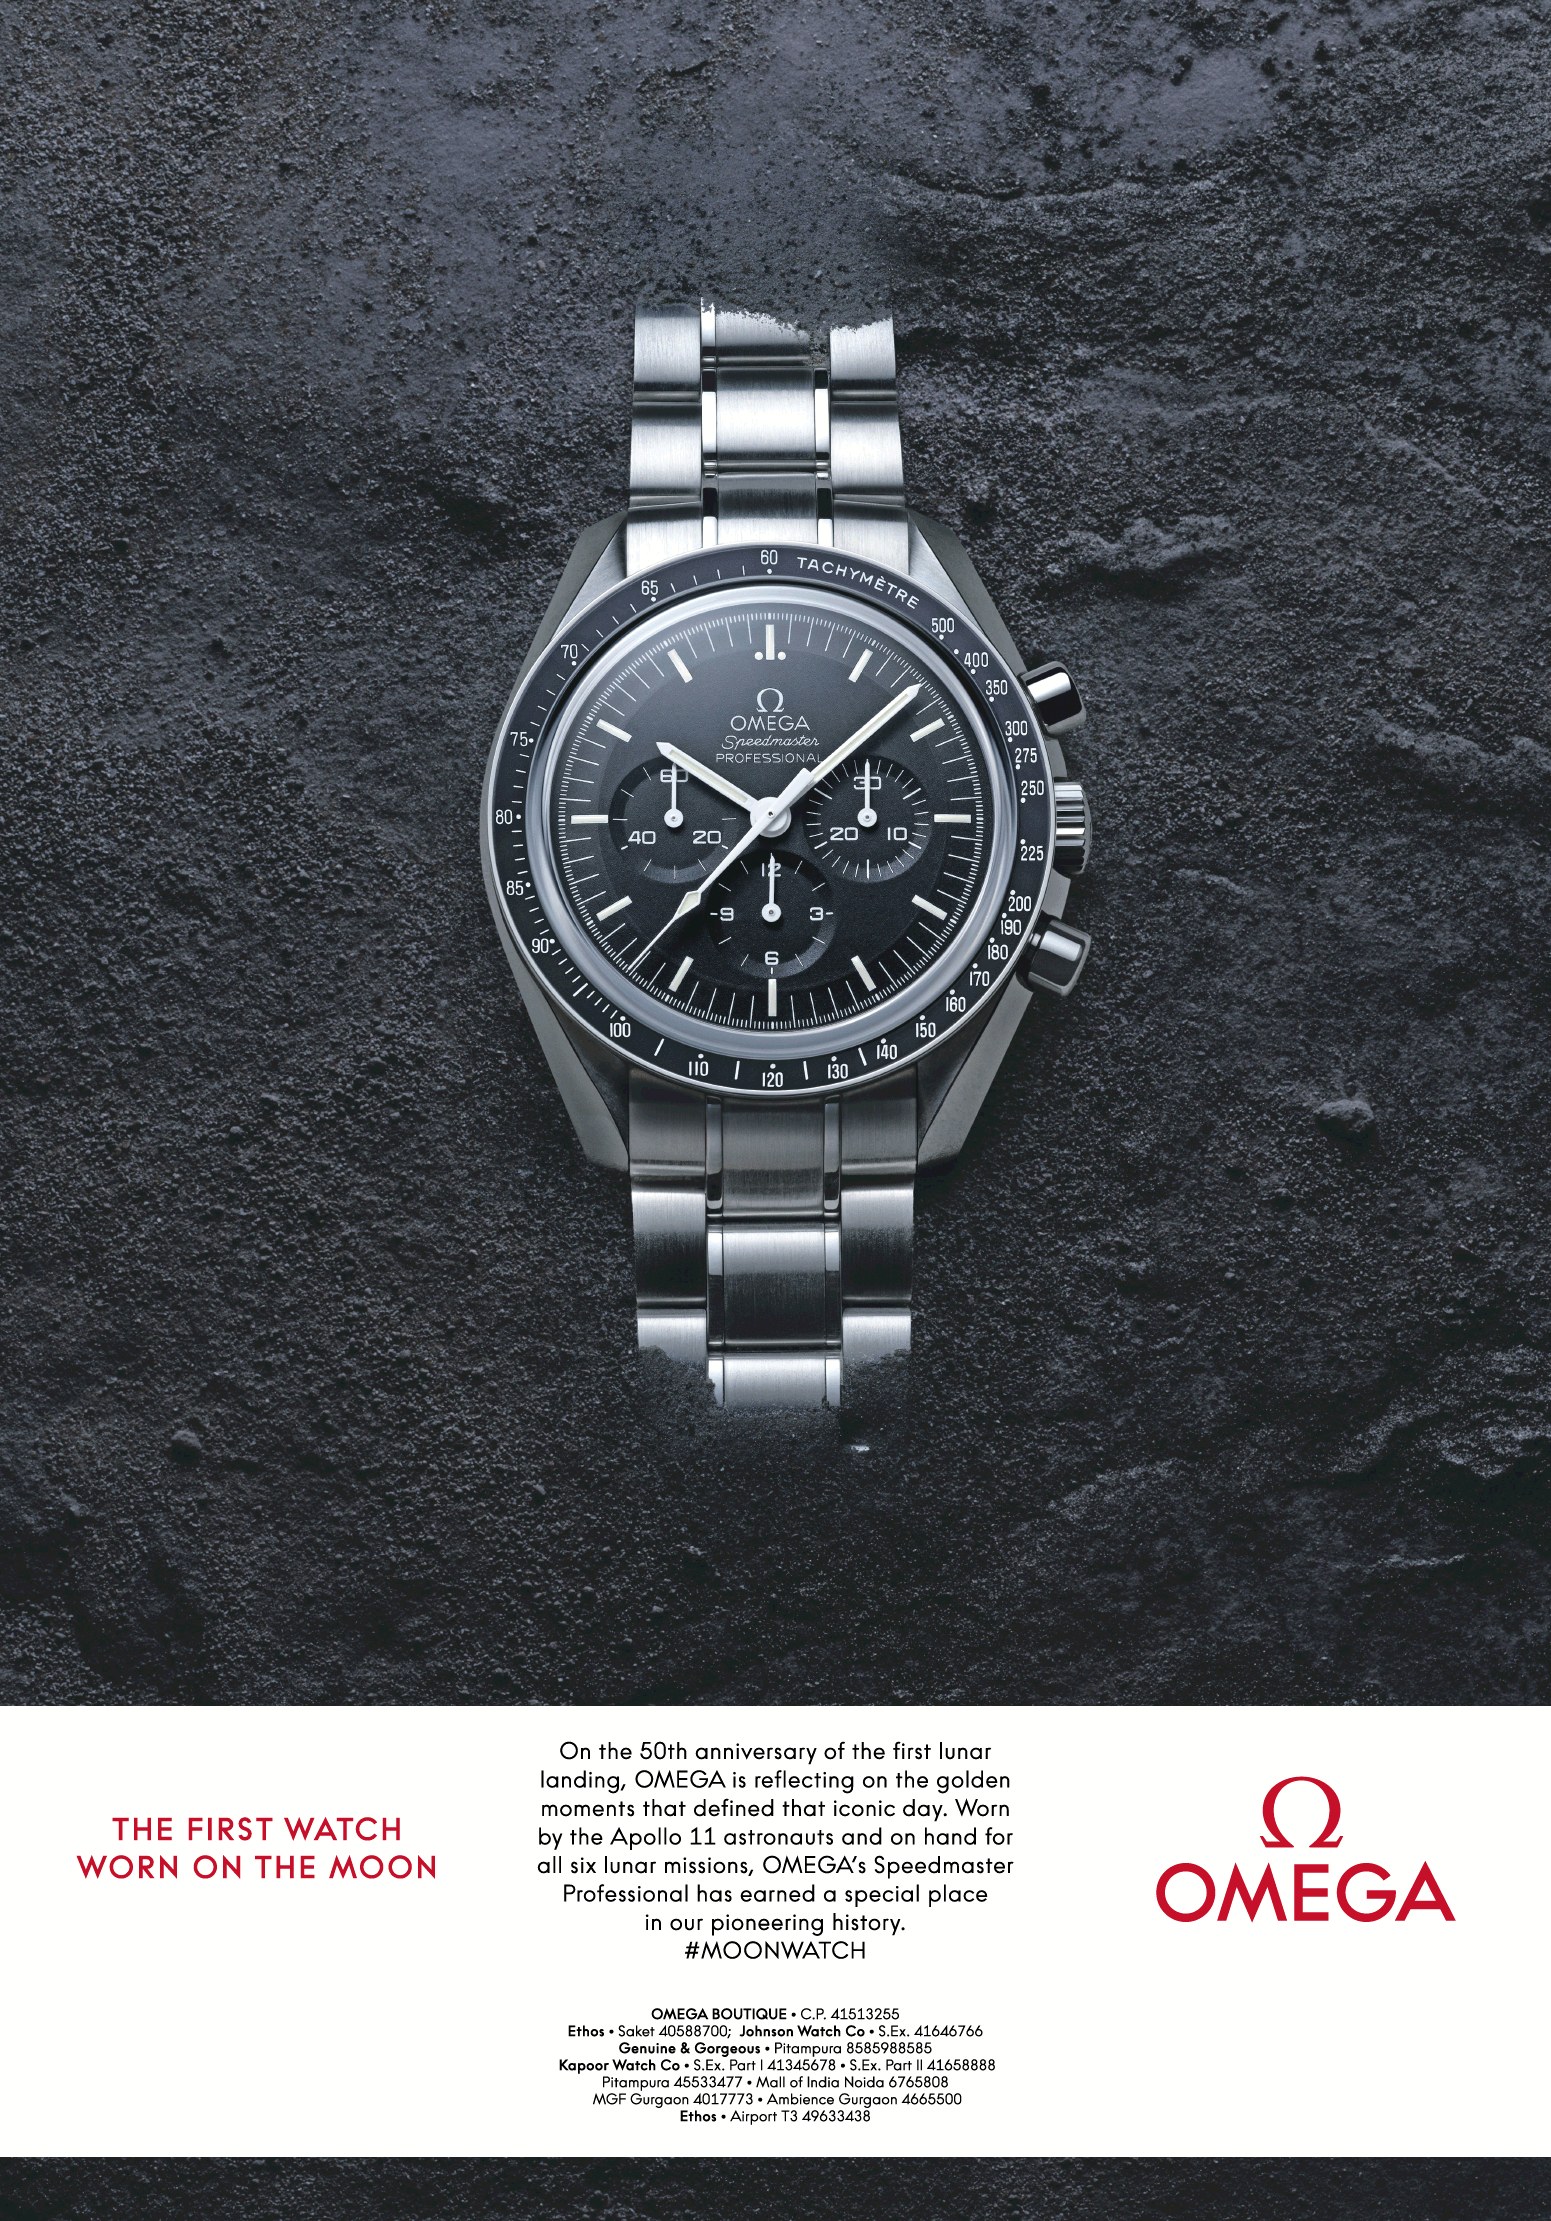 omega-watches-the-first-watch-worn-to-moon-ad-times-of-india-delhi-13-06-2019.png